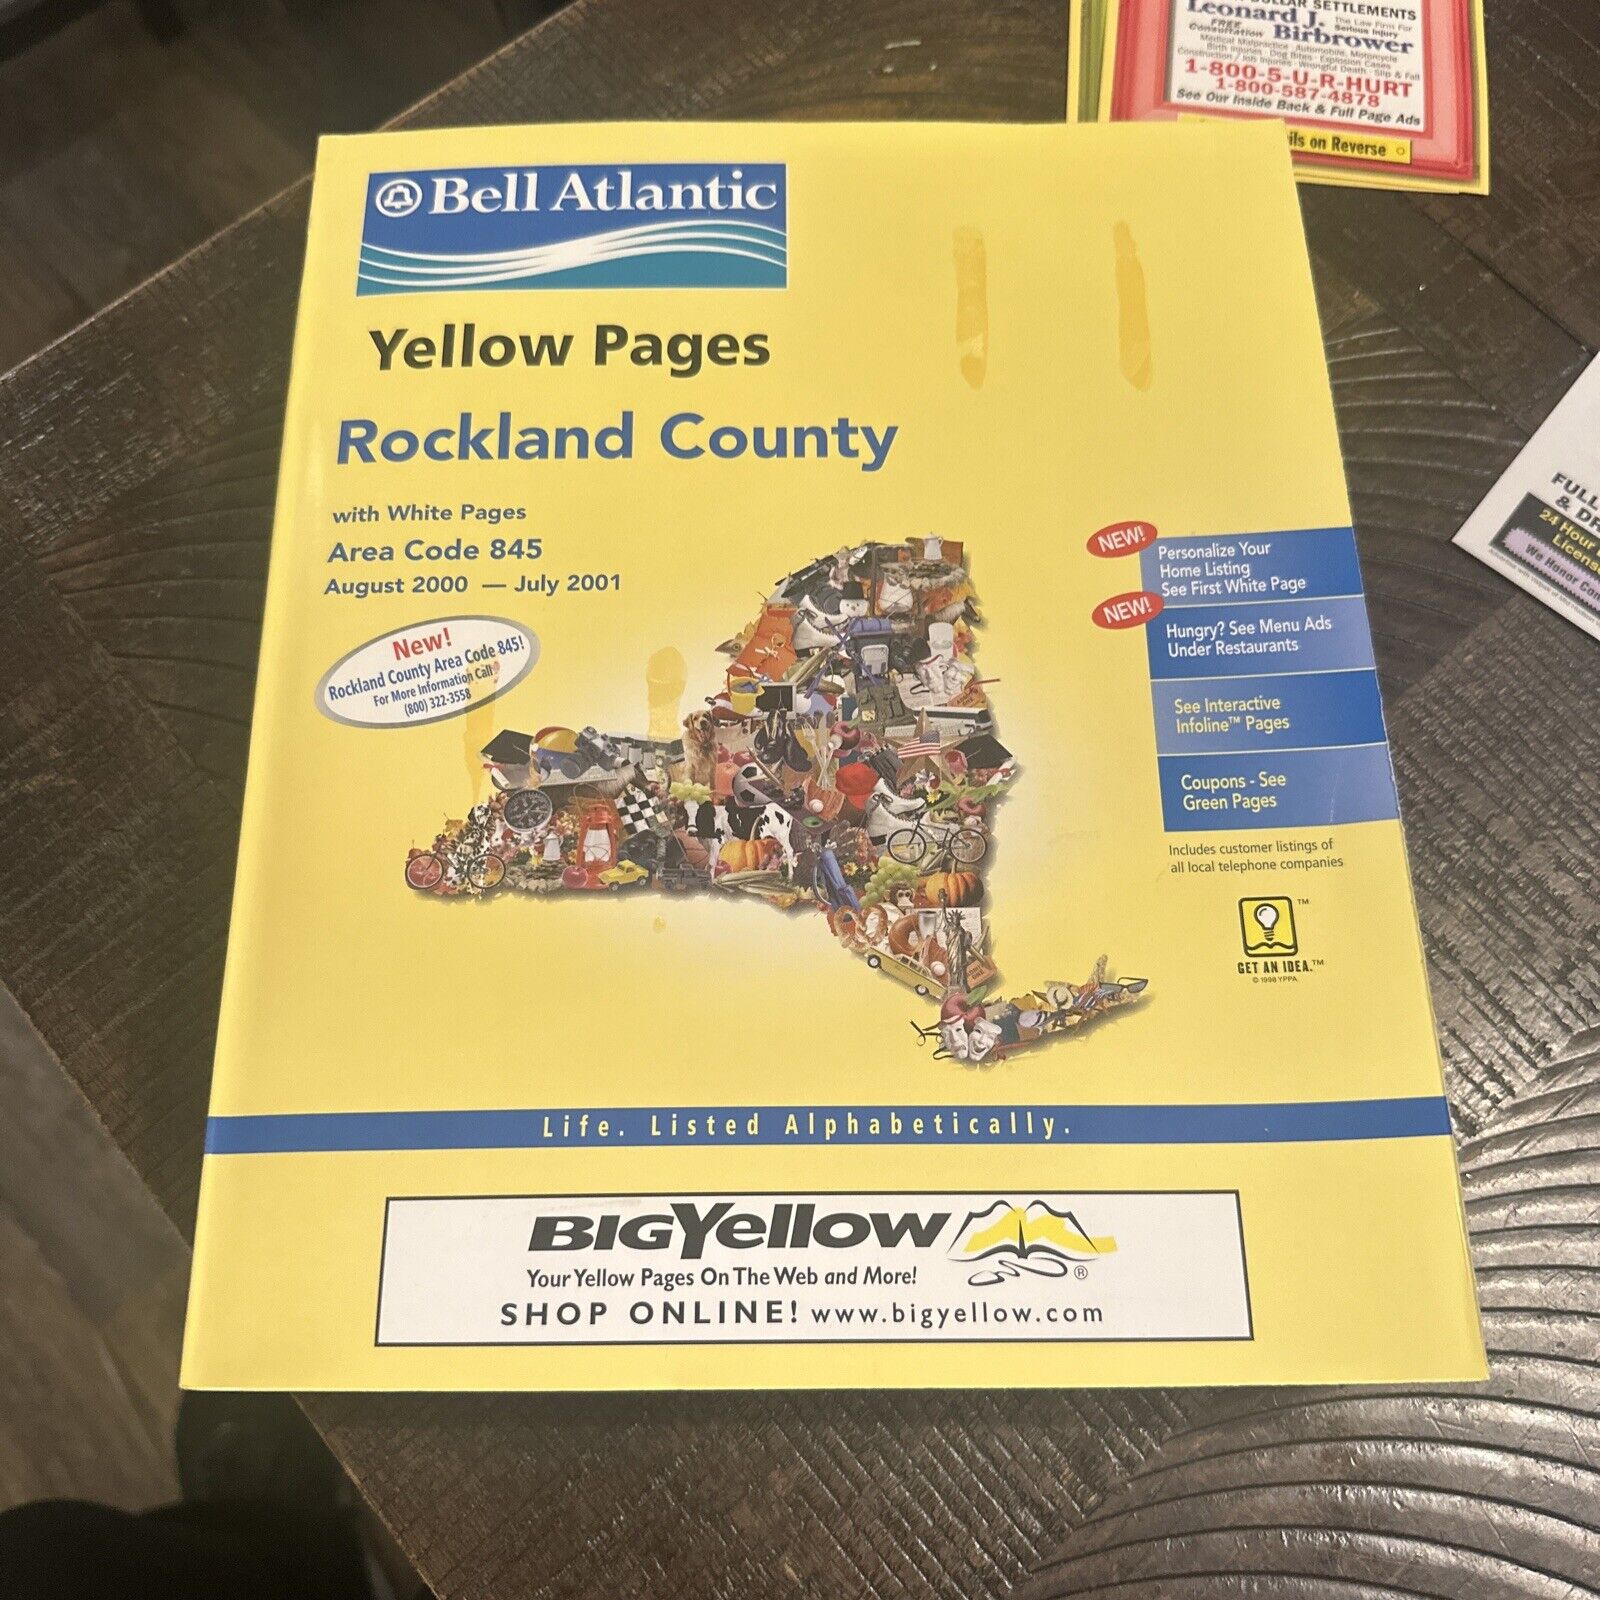 BellAtlantic August  2000 - July 2001 Rockland County, Yellow Pages Very Nice